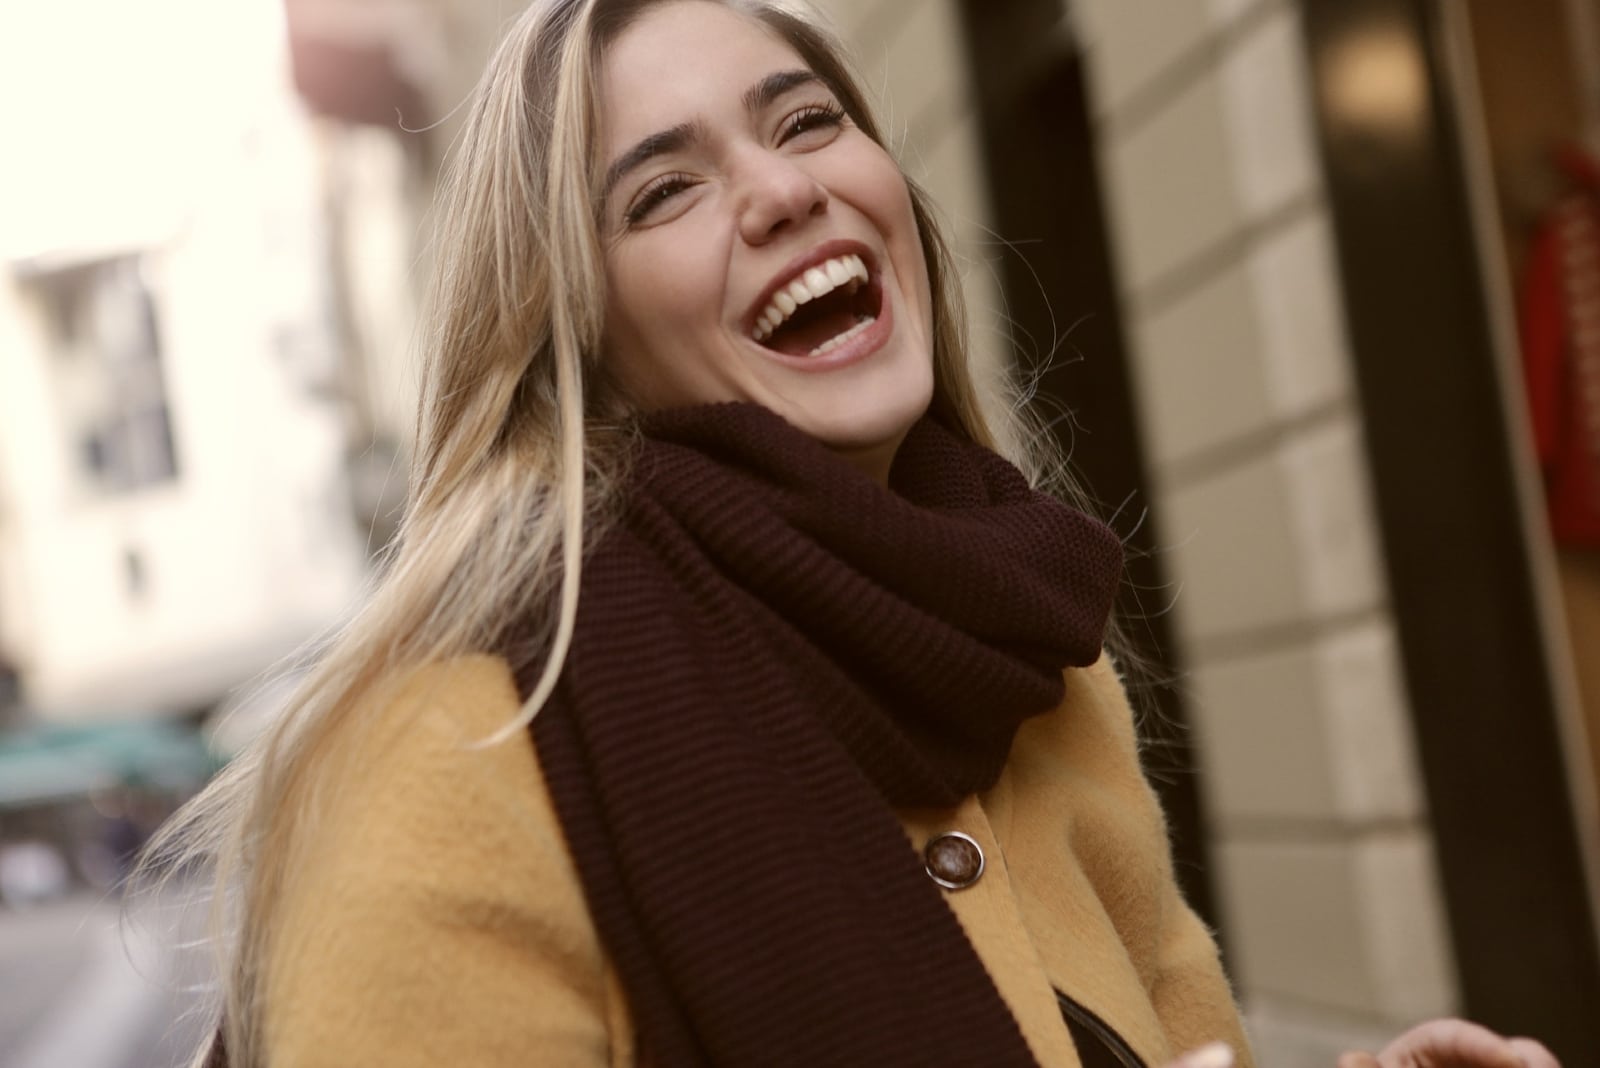 woman with brown scarf laughing while standing near building